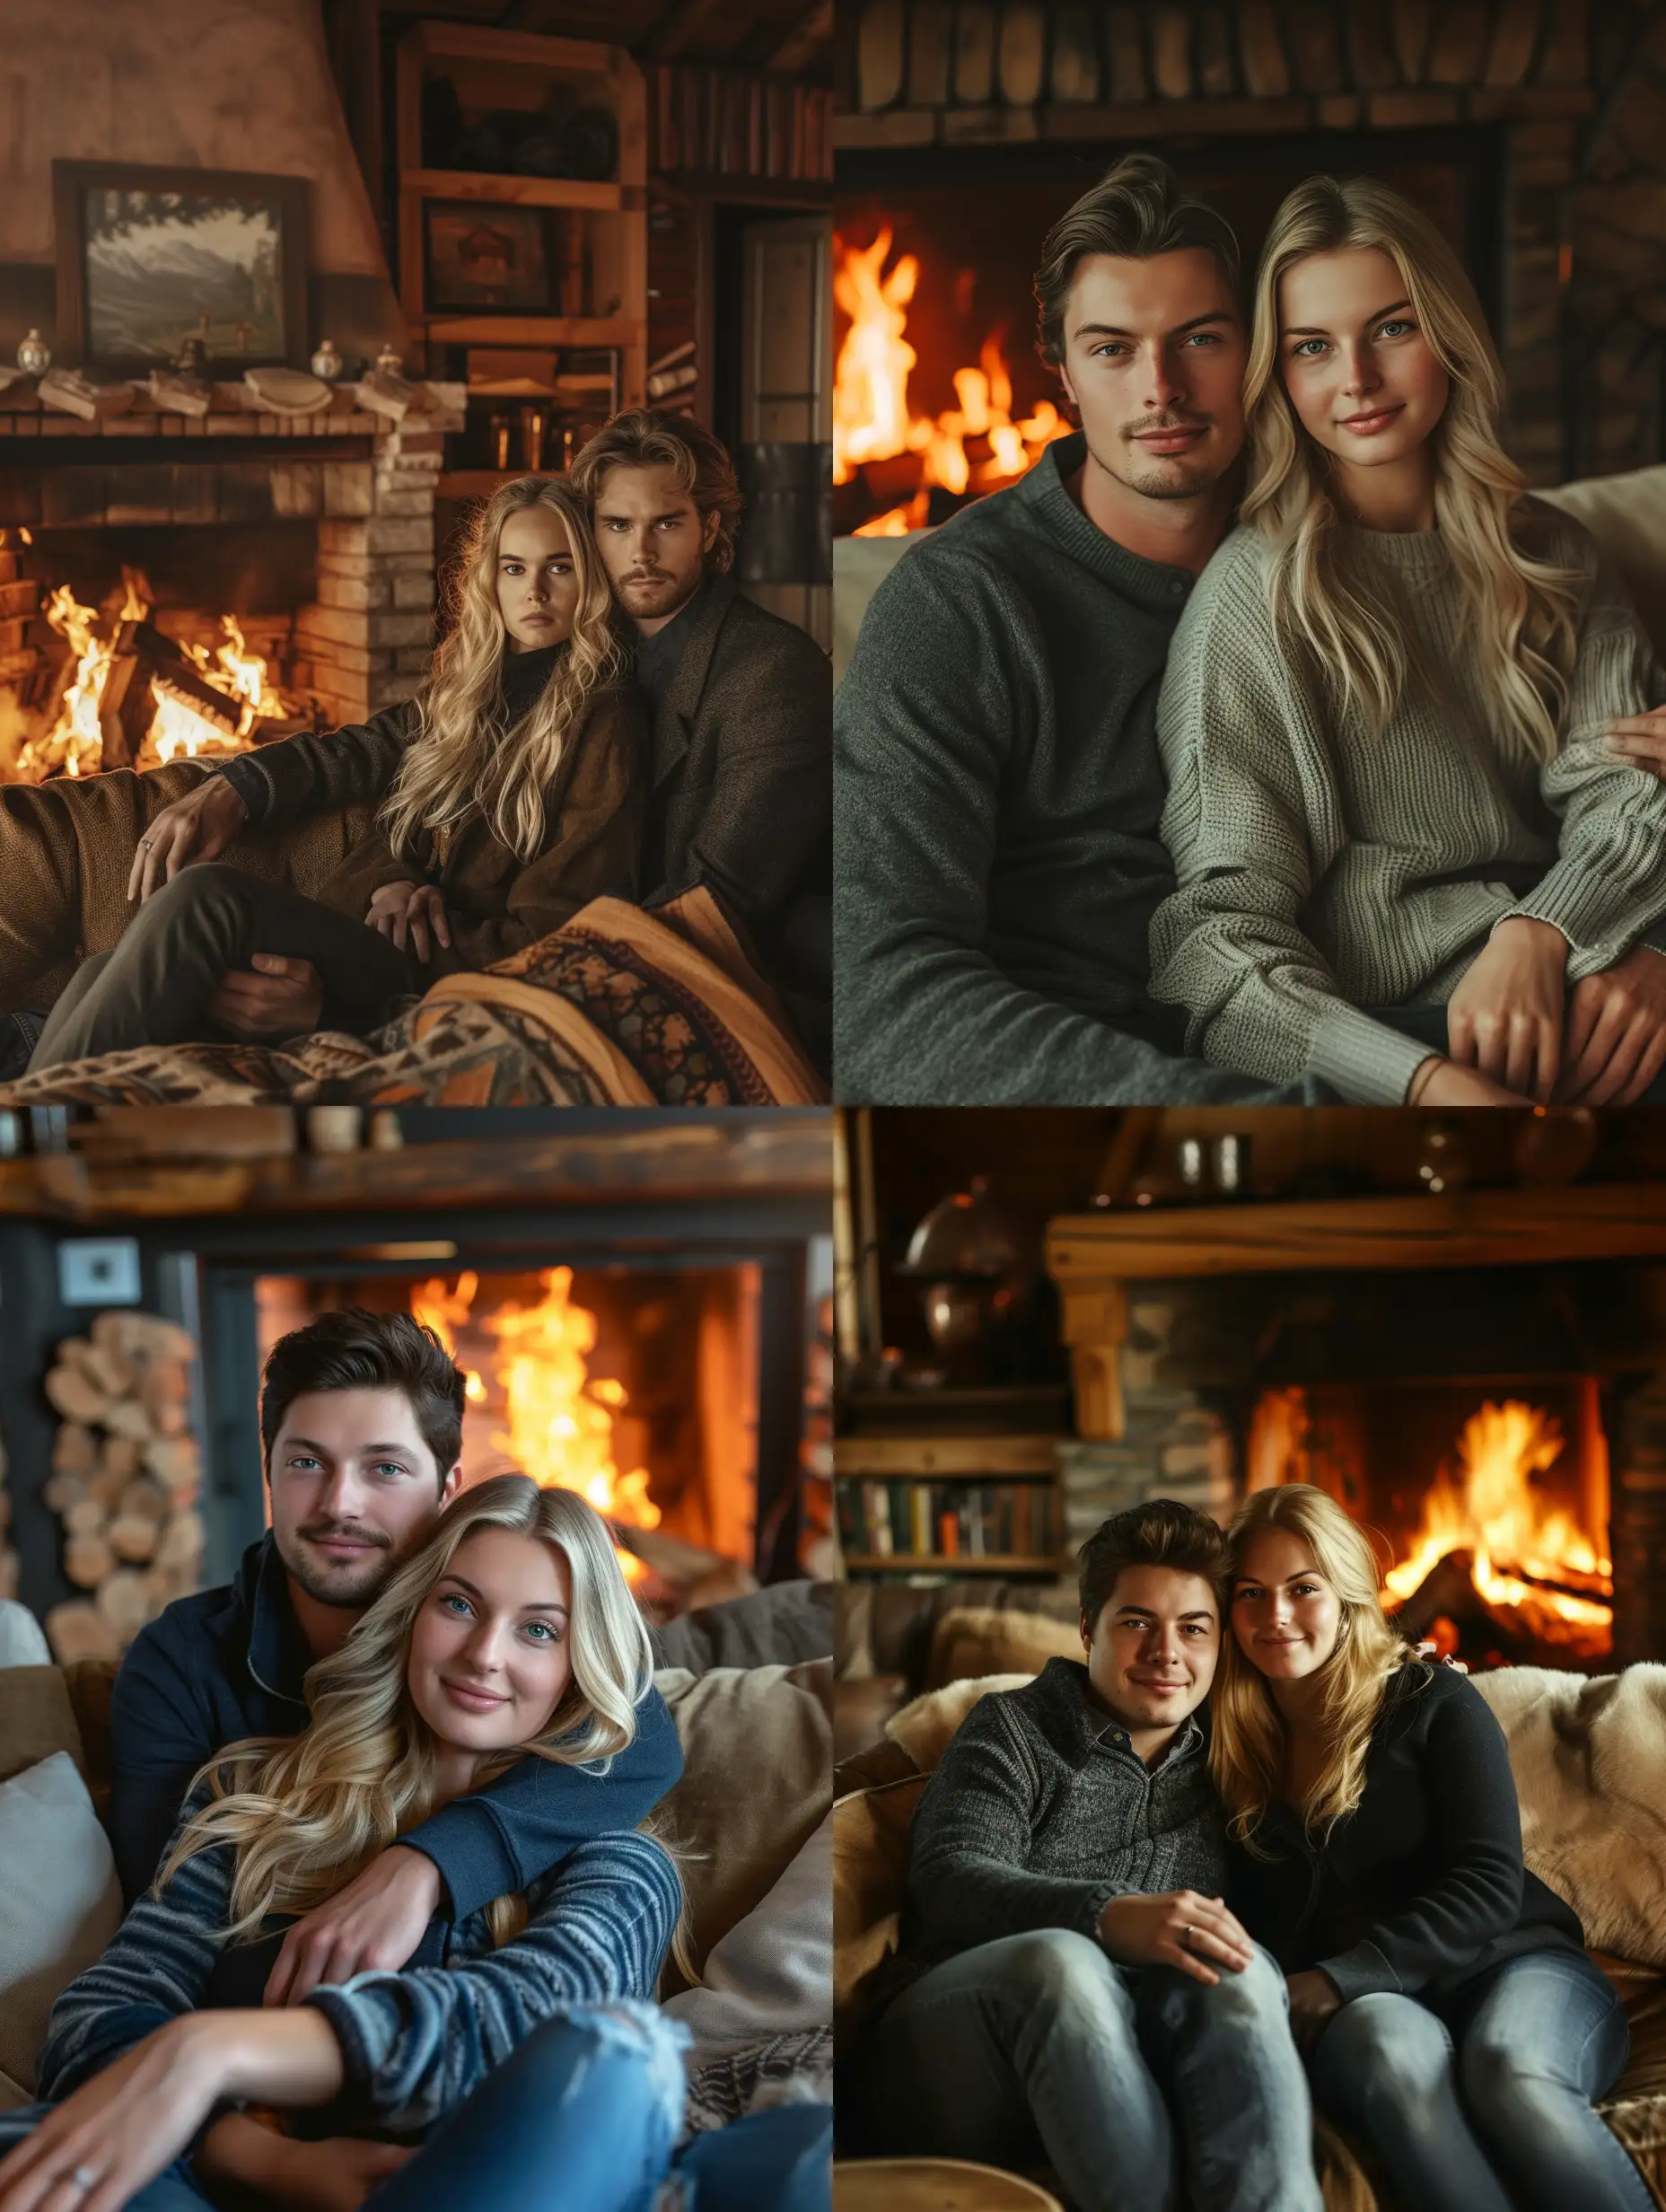 Man and woman sitting on a couch by a burning fireplace. in a cozy romantic atmosphere. the girl has blonde hair faces look into the camera well seen realistic photo with details